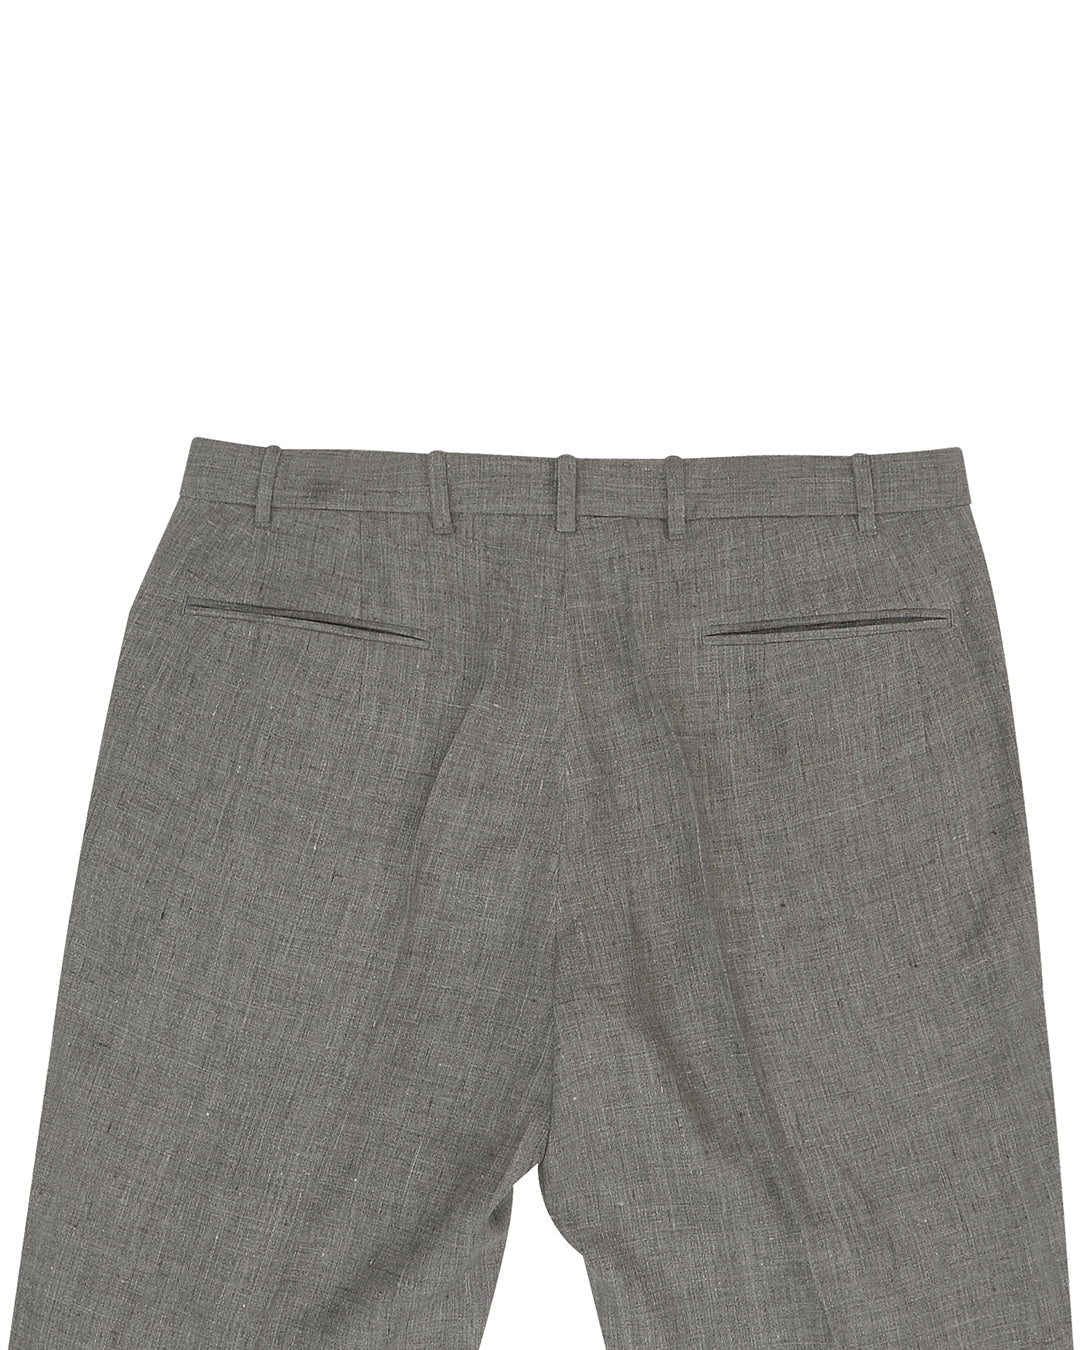 Back view of custom linen pants for men by Luxire in stone grey